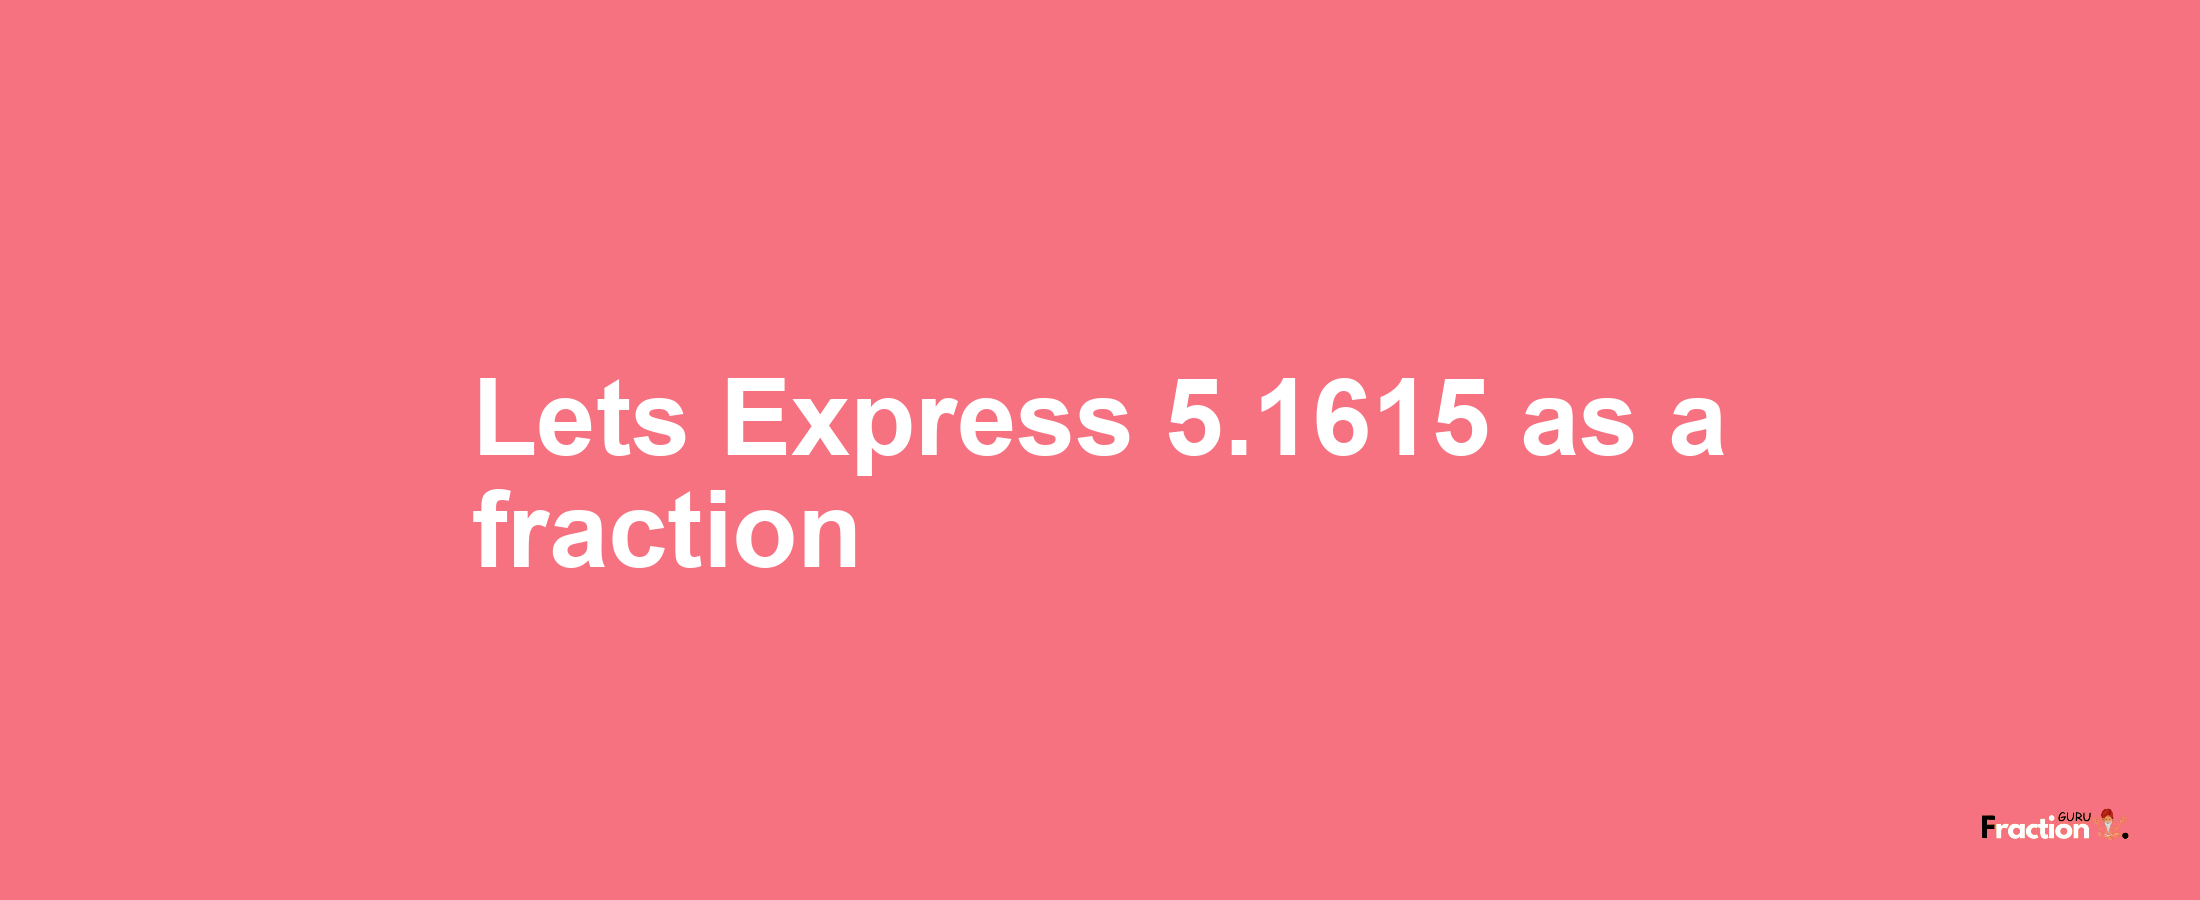 Lets Express 5.1615 as afraction